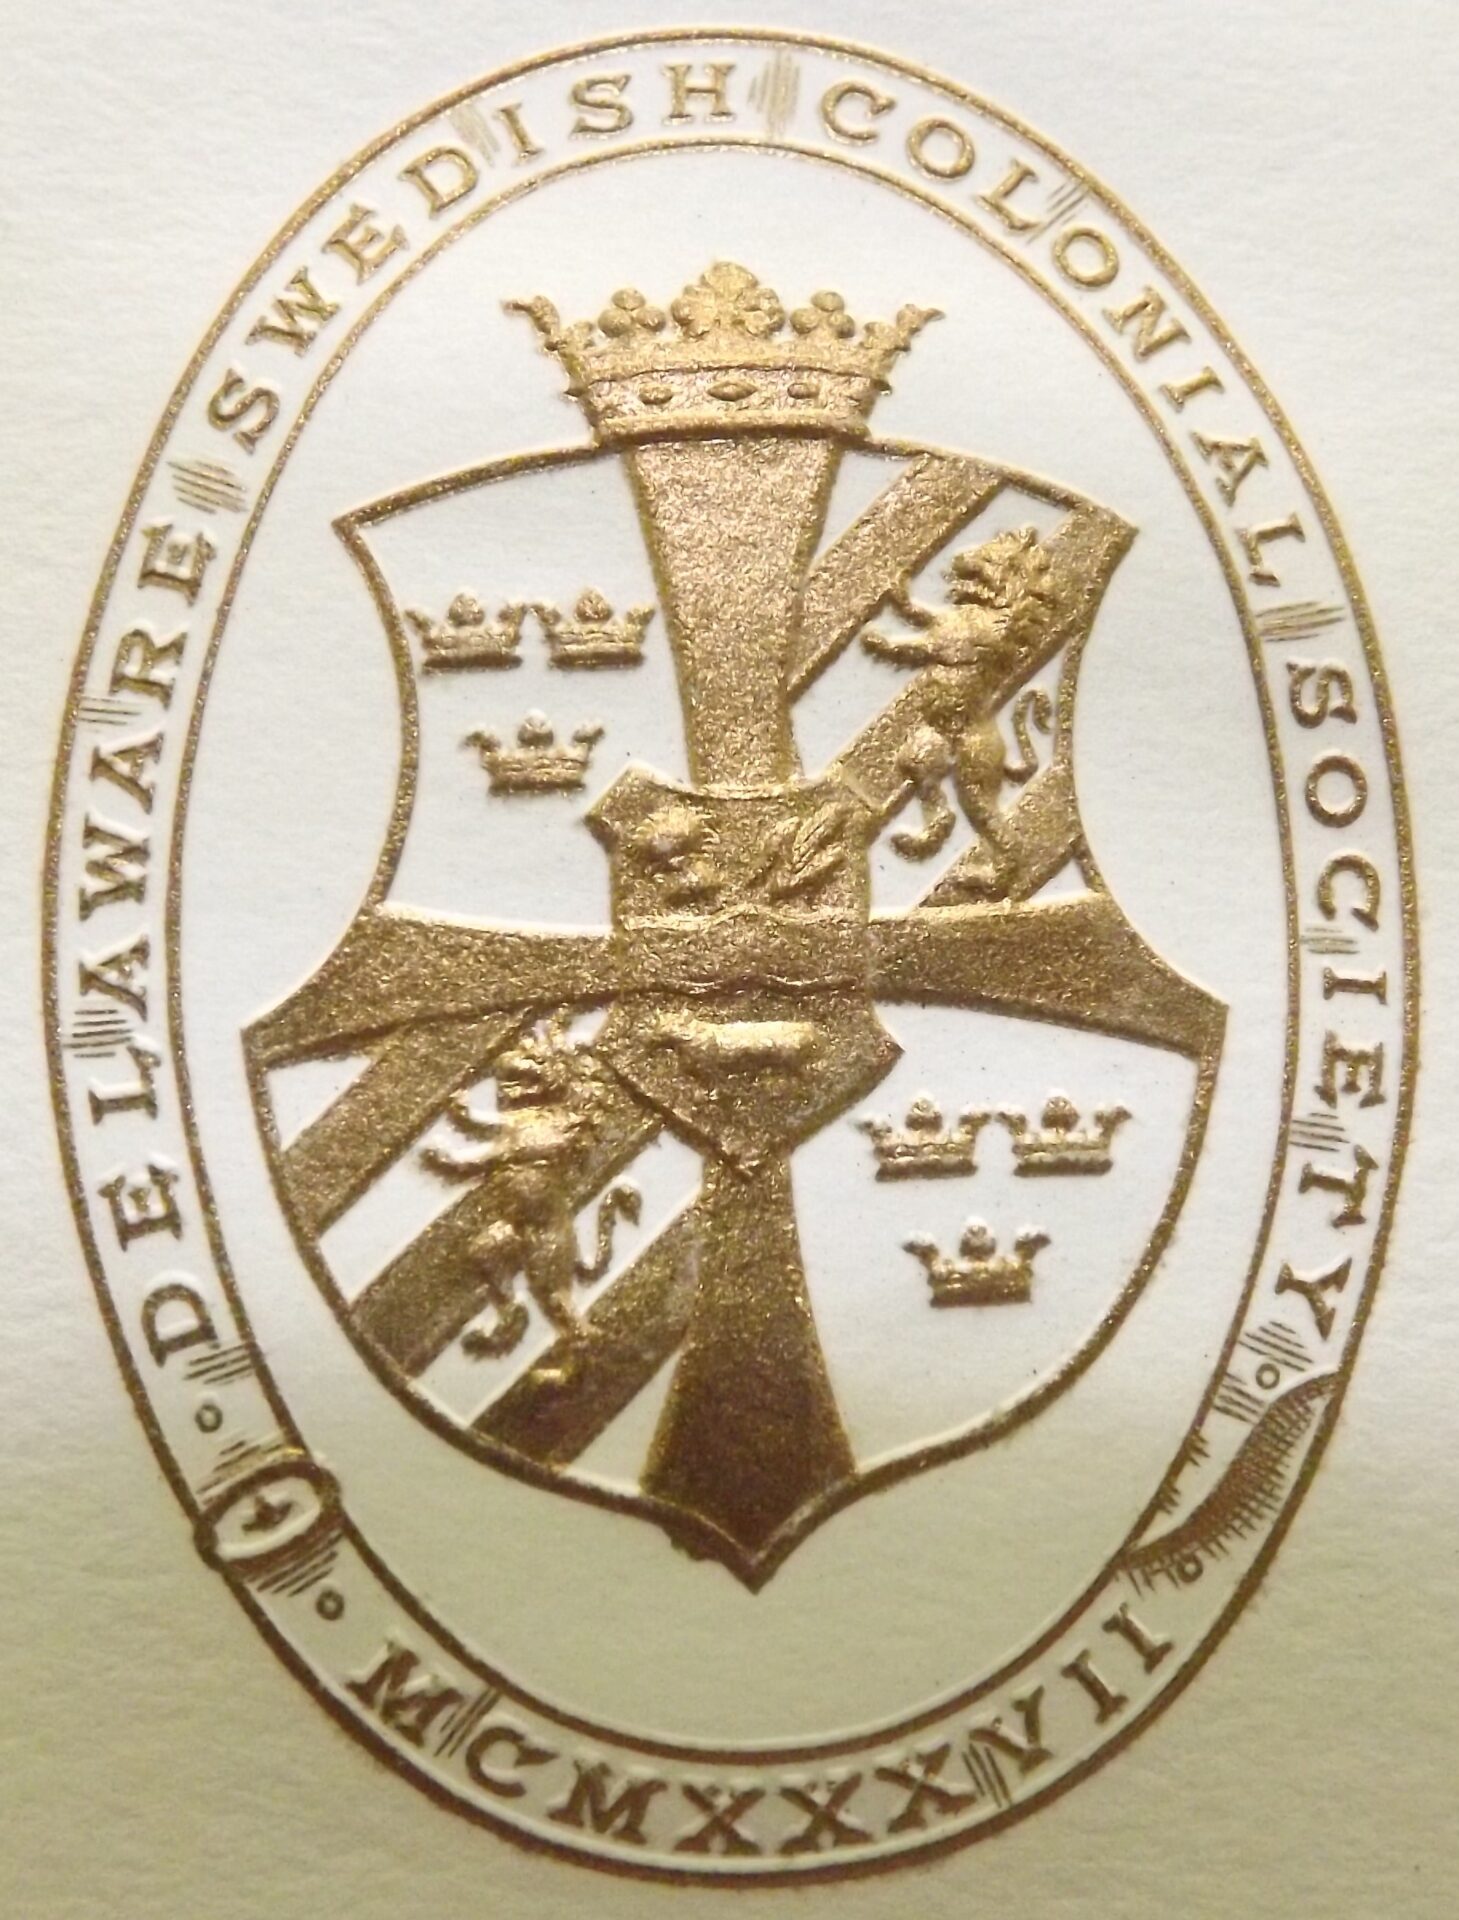 A close up of the crest on a card